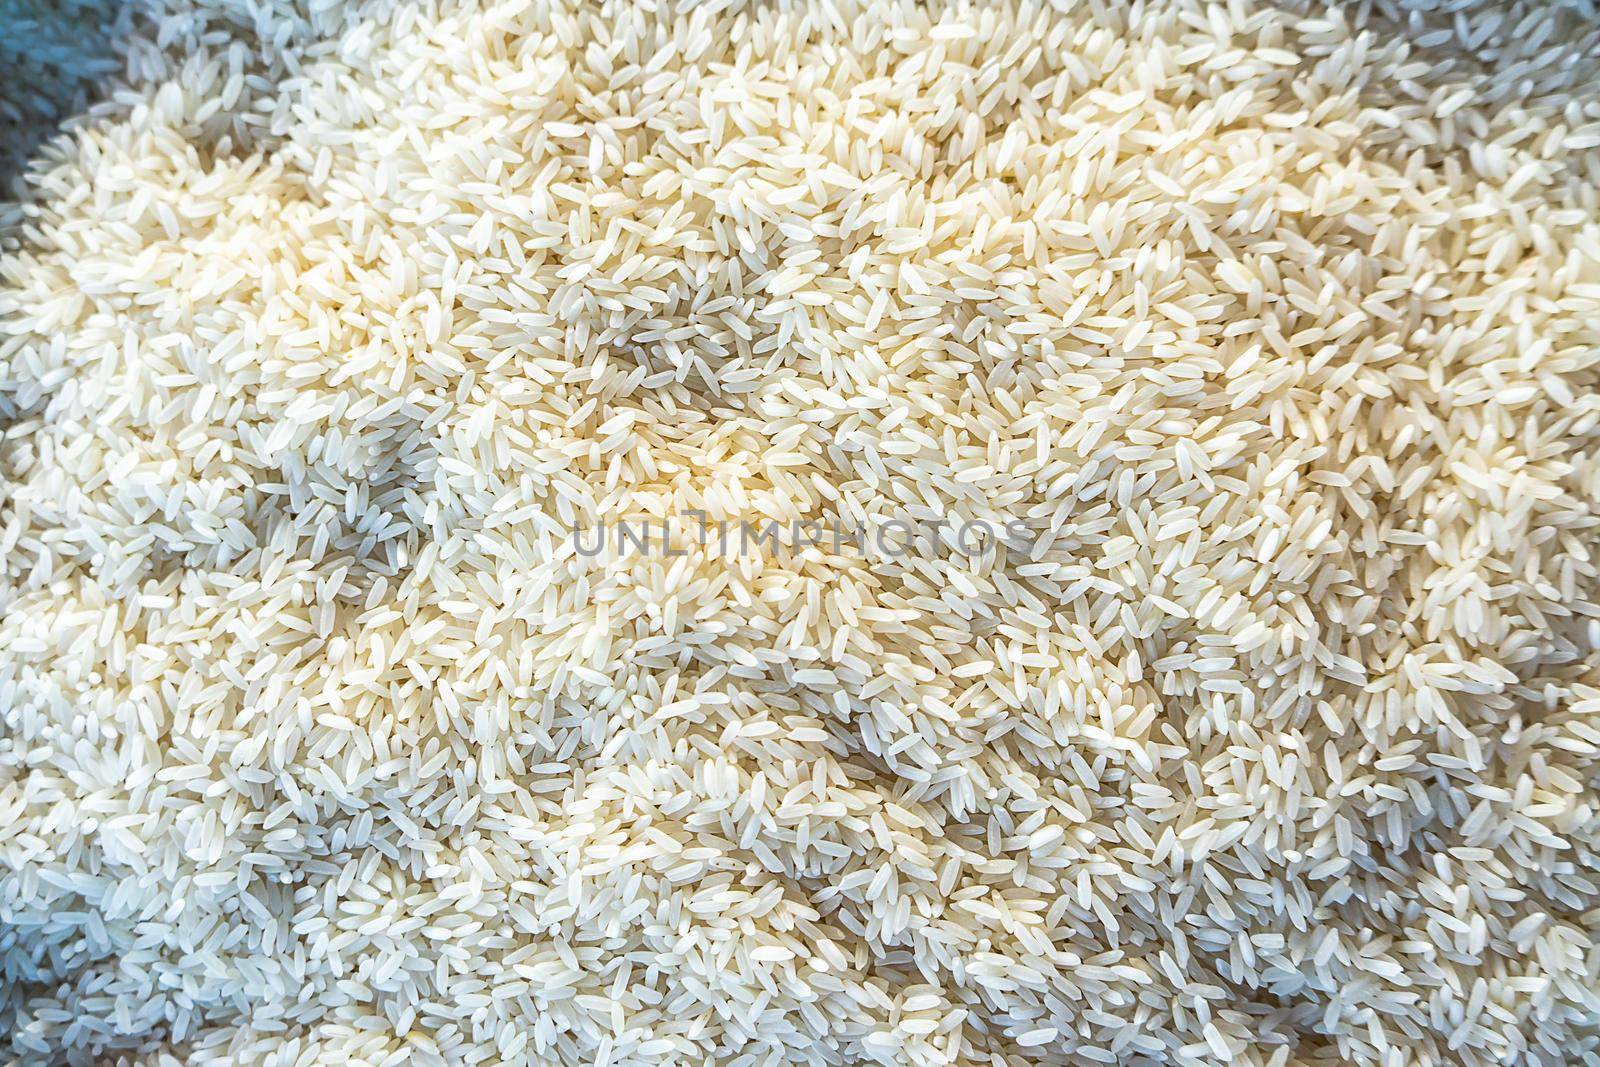 Top view of white rice photo style for wallpaper or texture.Basic grain essential for the diet in Latin America